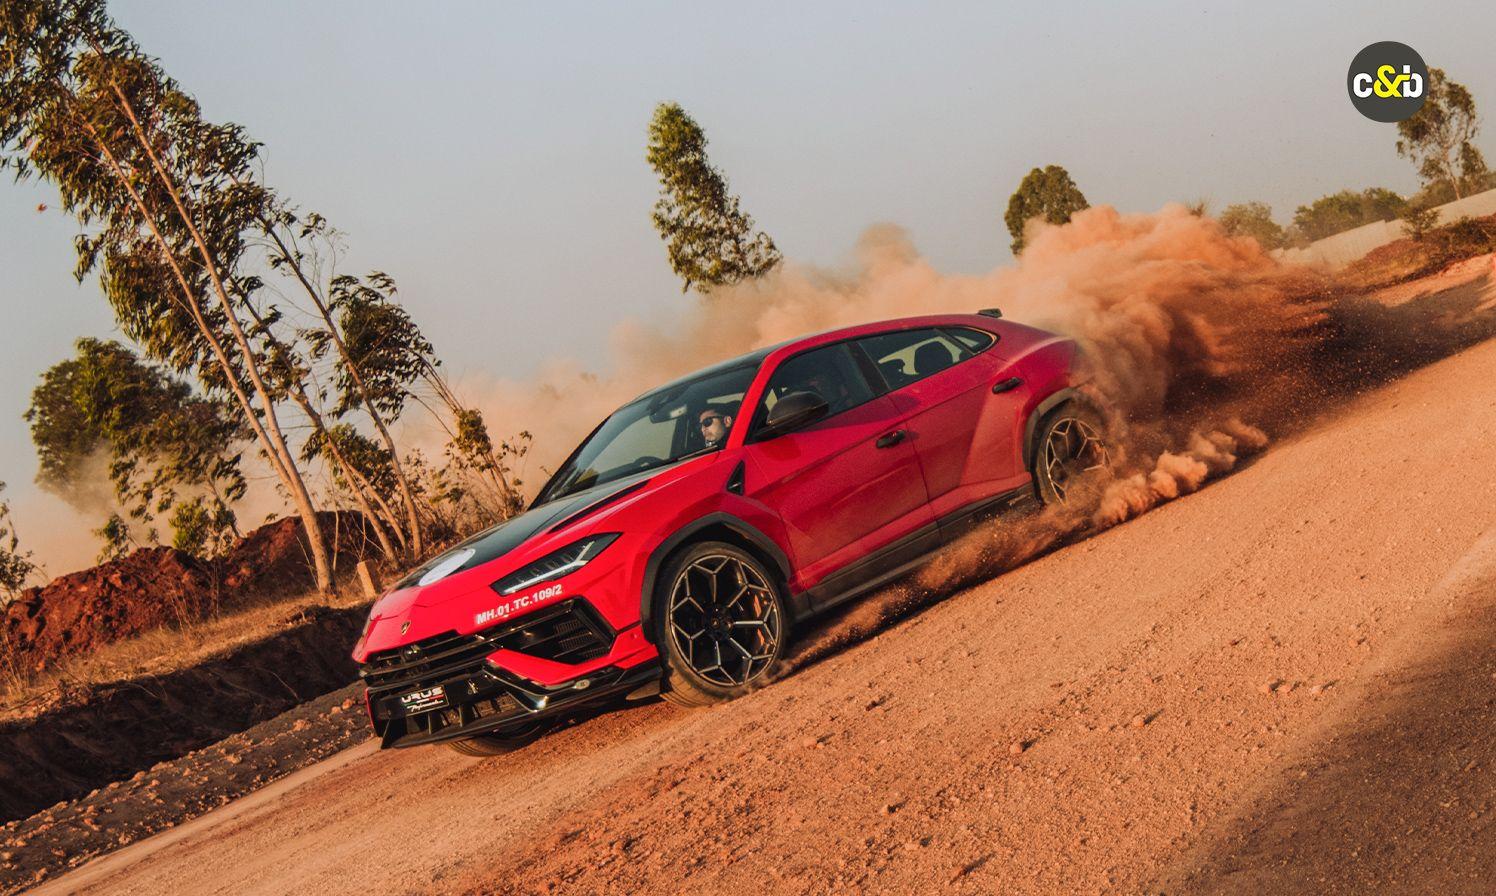 The model year update of the Urus has brought along a slightly more mental ‘superSUV’.